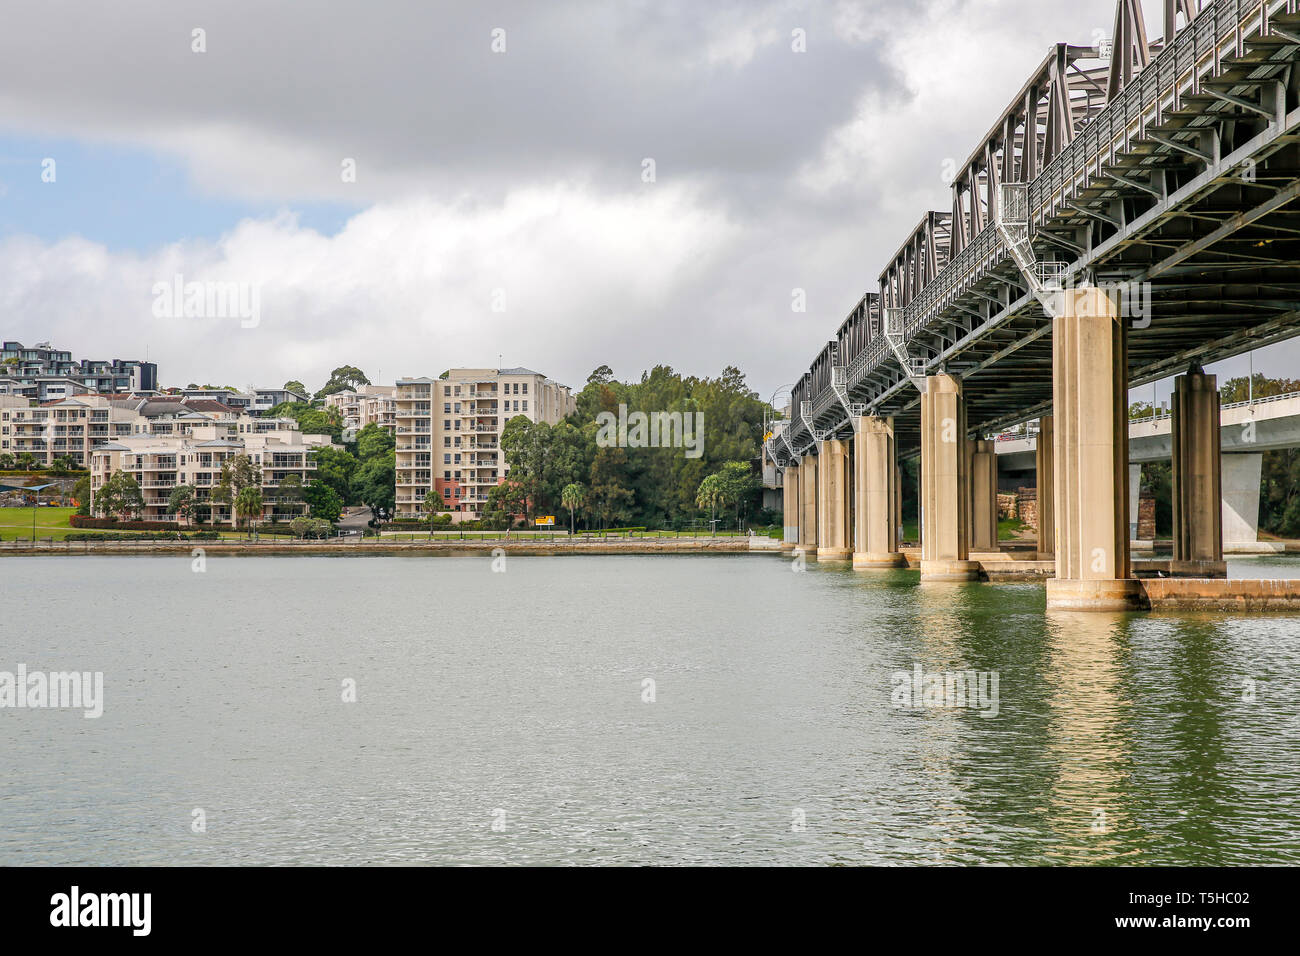 Iron Cove bridge built in the 19th century links the Sydney suburbs of Rozelle and Drummoyne, Sydney,New South Wales,Australia Stock Photo